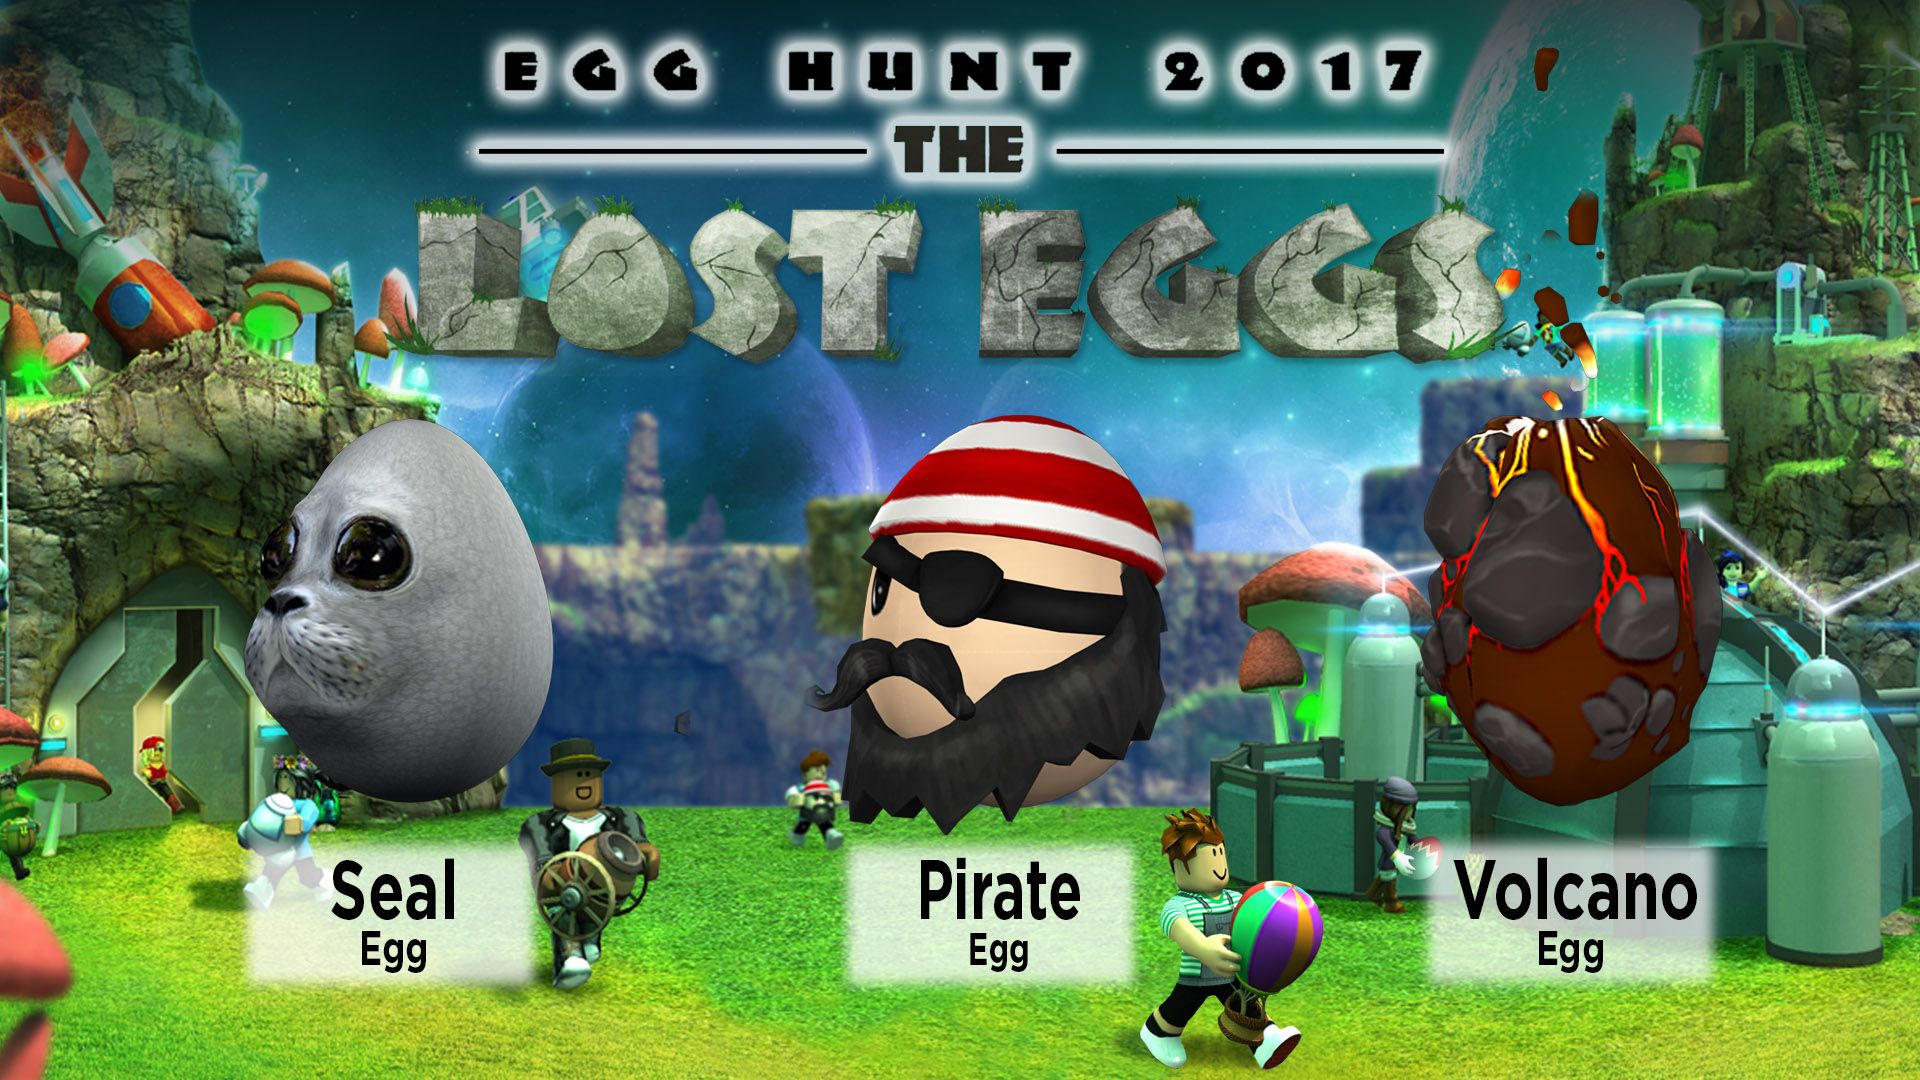 ‘Roblox’ Egg Hunt 2017 Leaked Eggs, Gear, Dates & Everything We Know